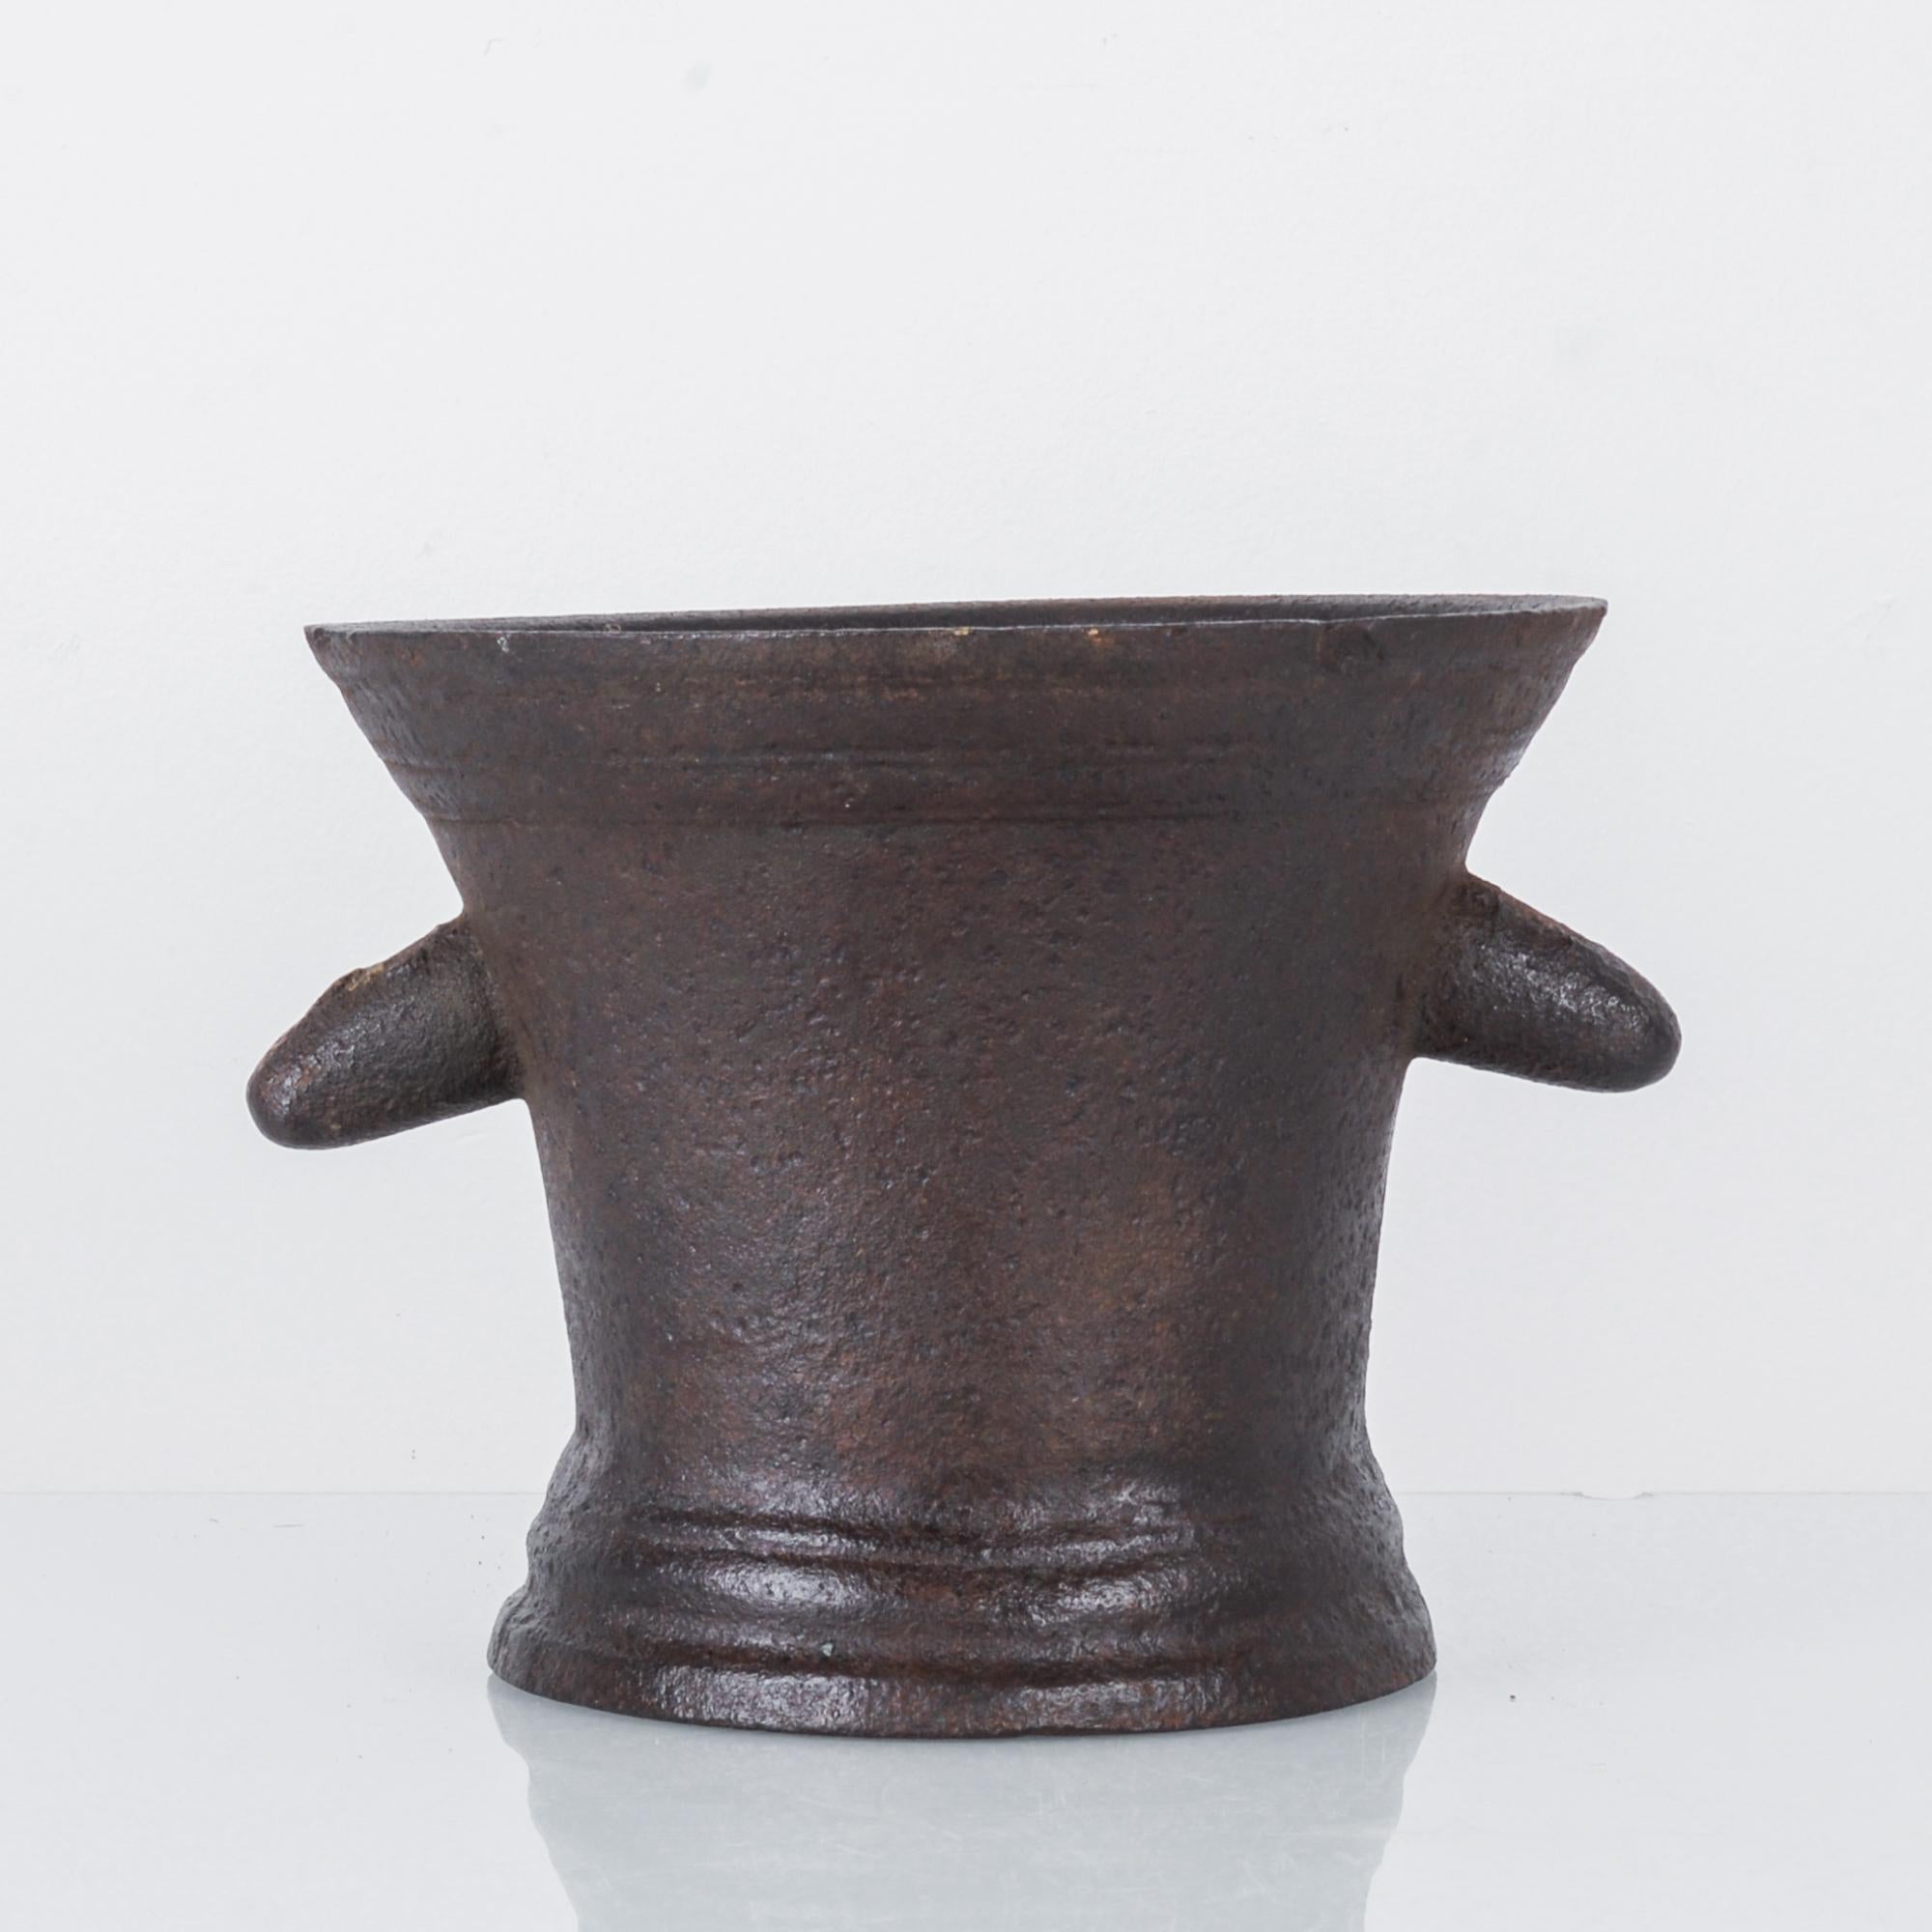 A cast iron mortar from France, circa 1820. A cup-shaped vessel with a heavy base and brim, cast in a dark metal with warm red tones and a speckled grain. Two stubby, downturned handles lend an almost anthropomorphic effect, suggestive of an